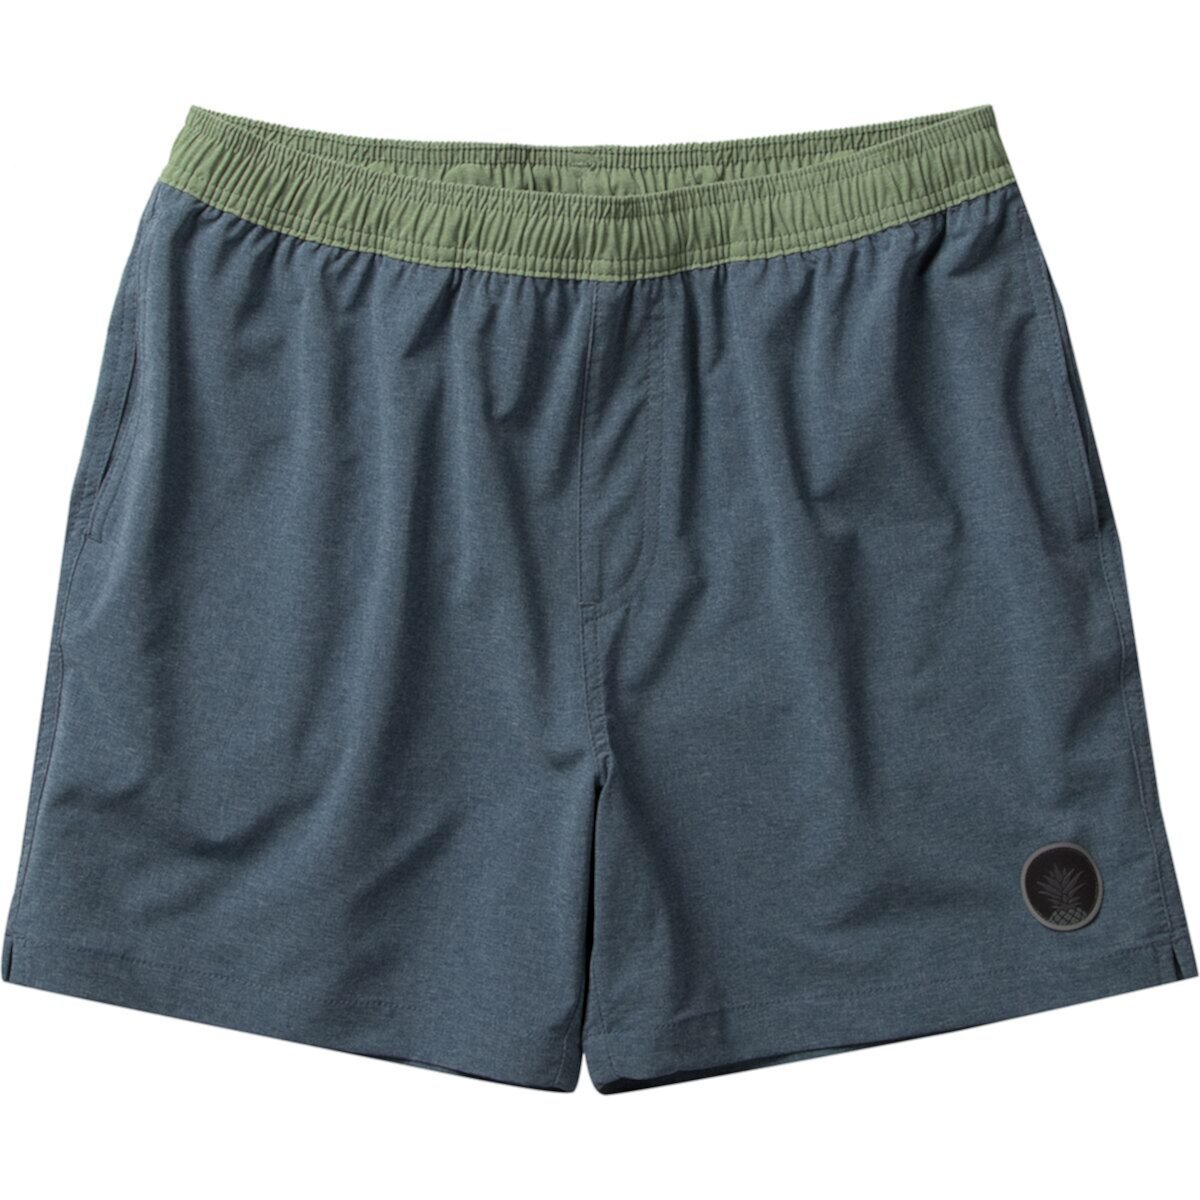 The Deep Dives 5.5in Stretch (Gym/Swim) Short CHUBBIES